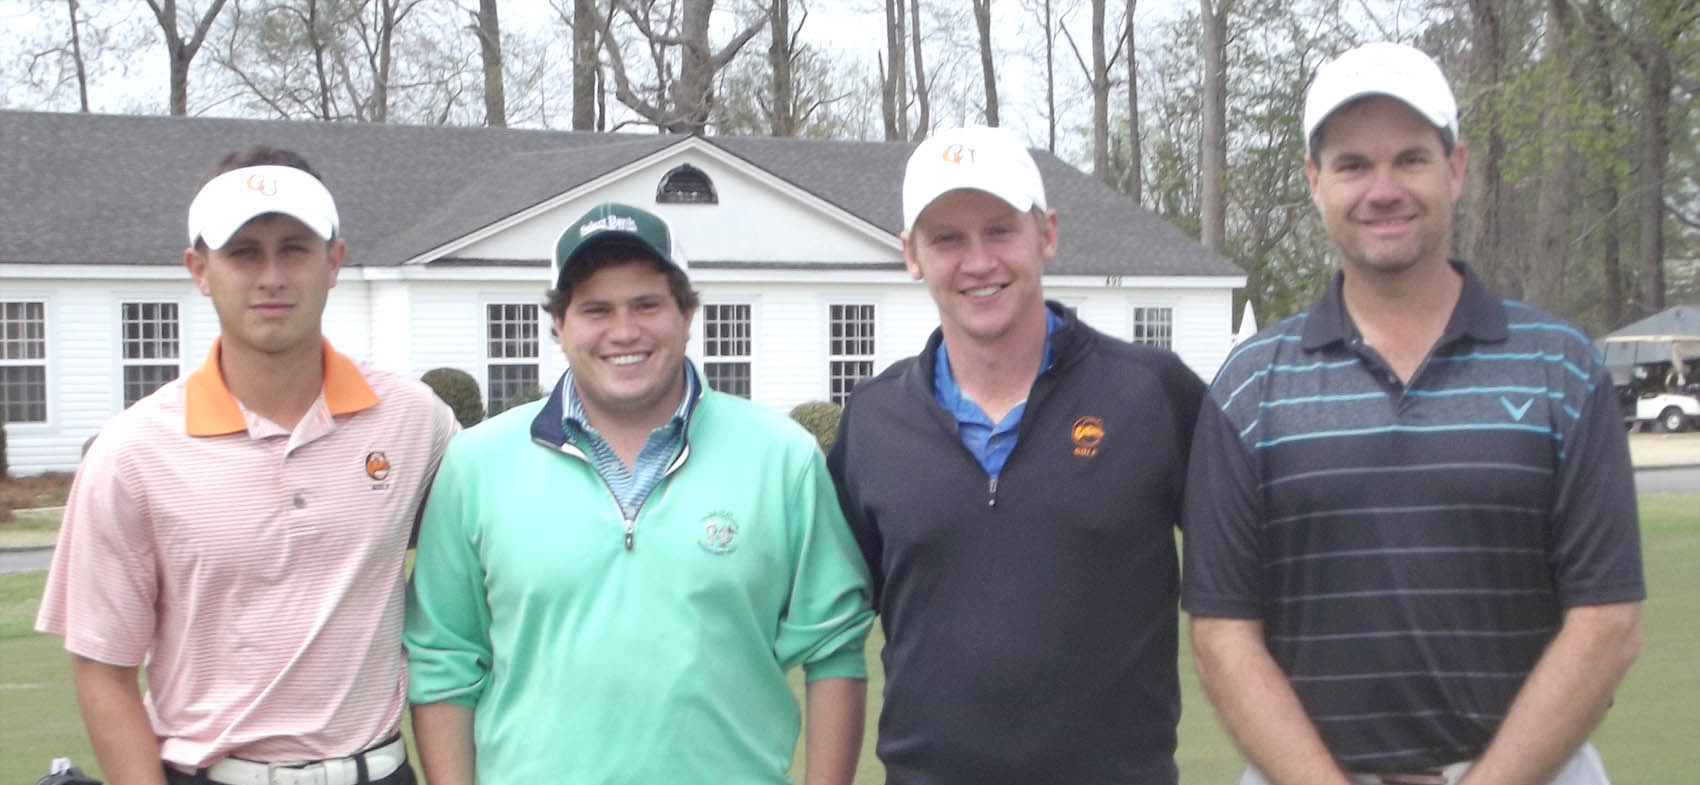 Click to enlarge,  Members of the first flight winning team in the fourth Central Carolina Community College Foundation Harnett Golf Classic were Jeremy Nevius, Josh Goheen, Jeremy Milton, and Kenny Stewart. For information about the Foundation, donating to it, establishing a scholarship, or other fund-raising events, contact Emily Hare, Executive Director of the CCCC Foundation, 919-718-7230, or ehare@cccc.edu. Information is also available at the CCCC Foundation website, www.cccc.edu/foundation. 